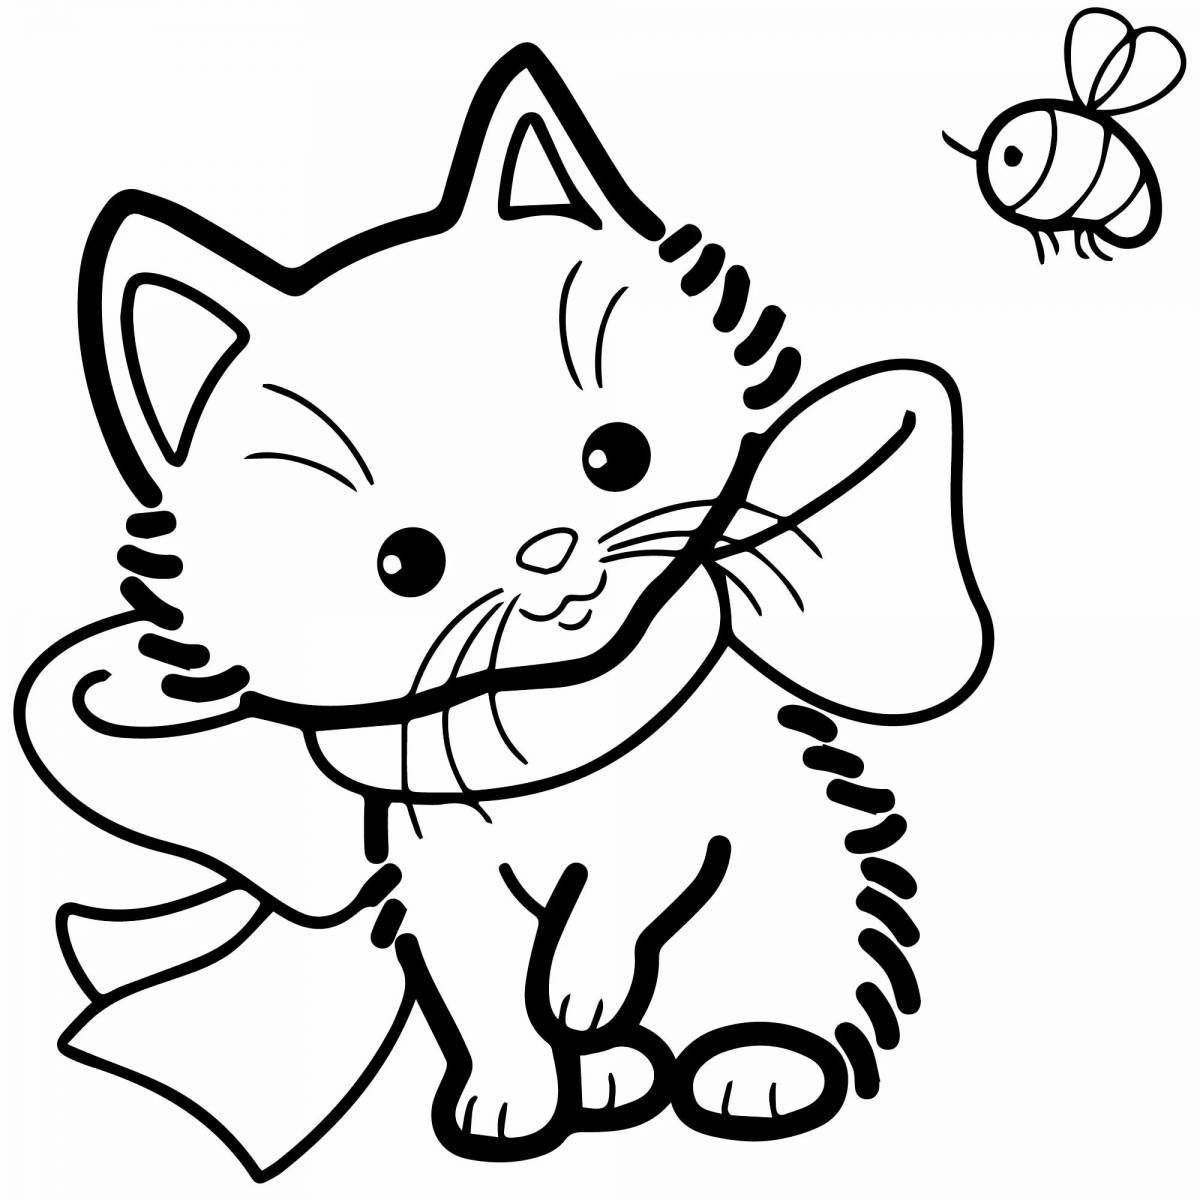 Coloring book shining kote for kids